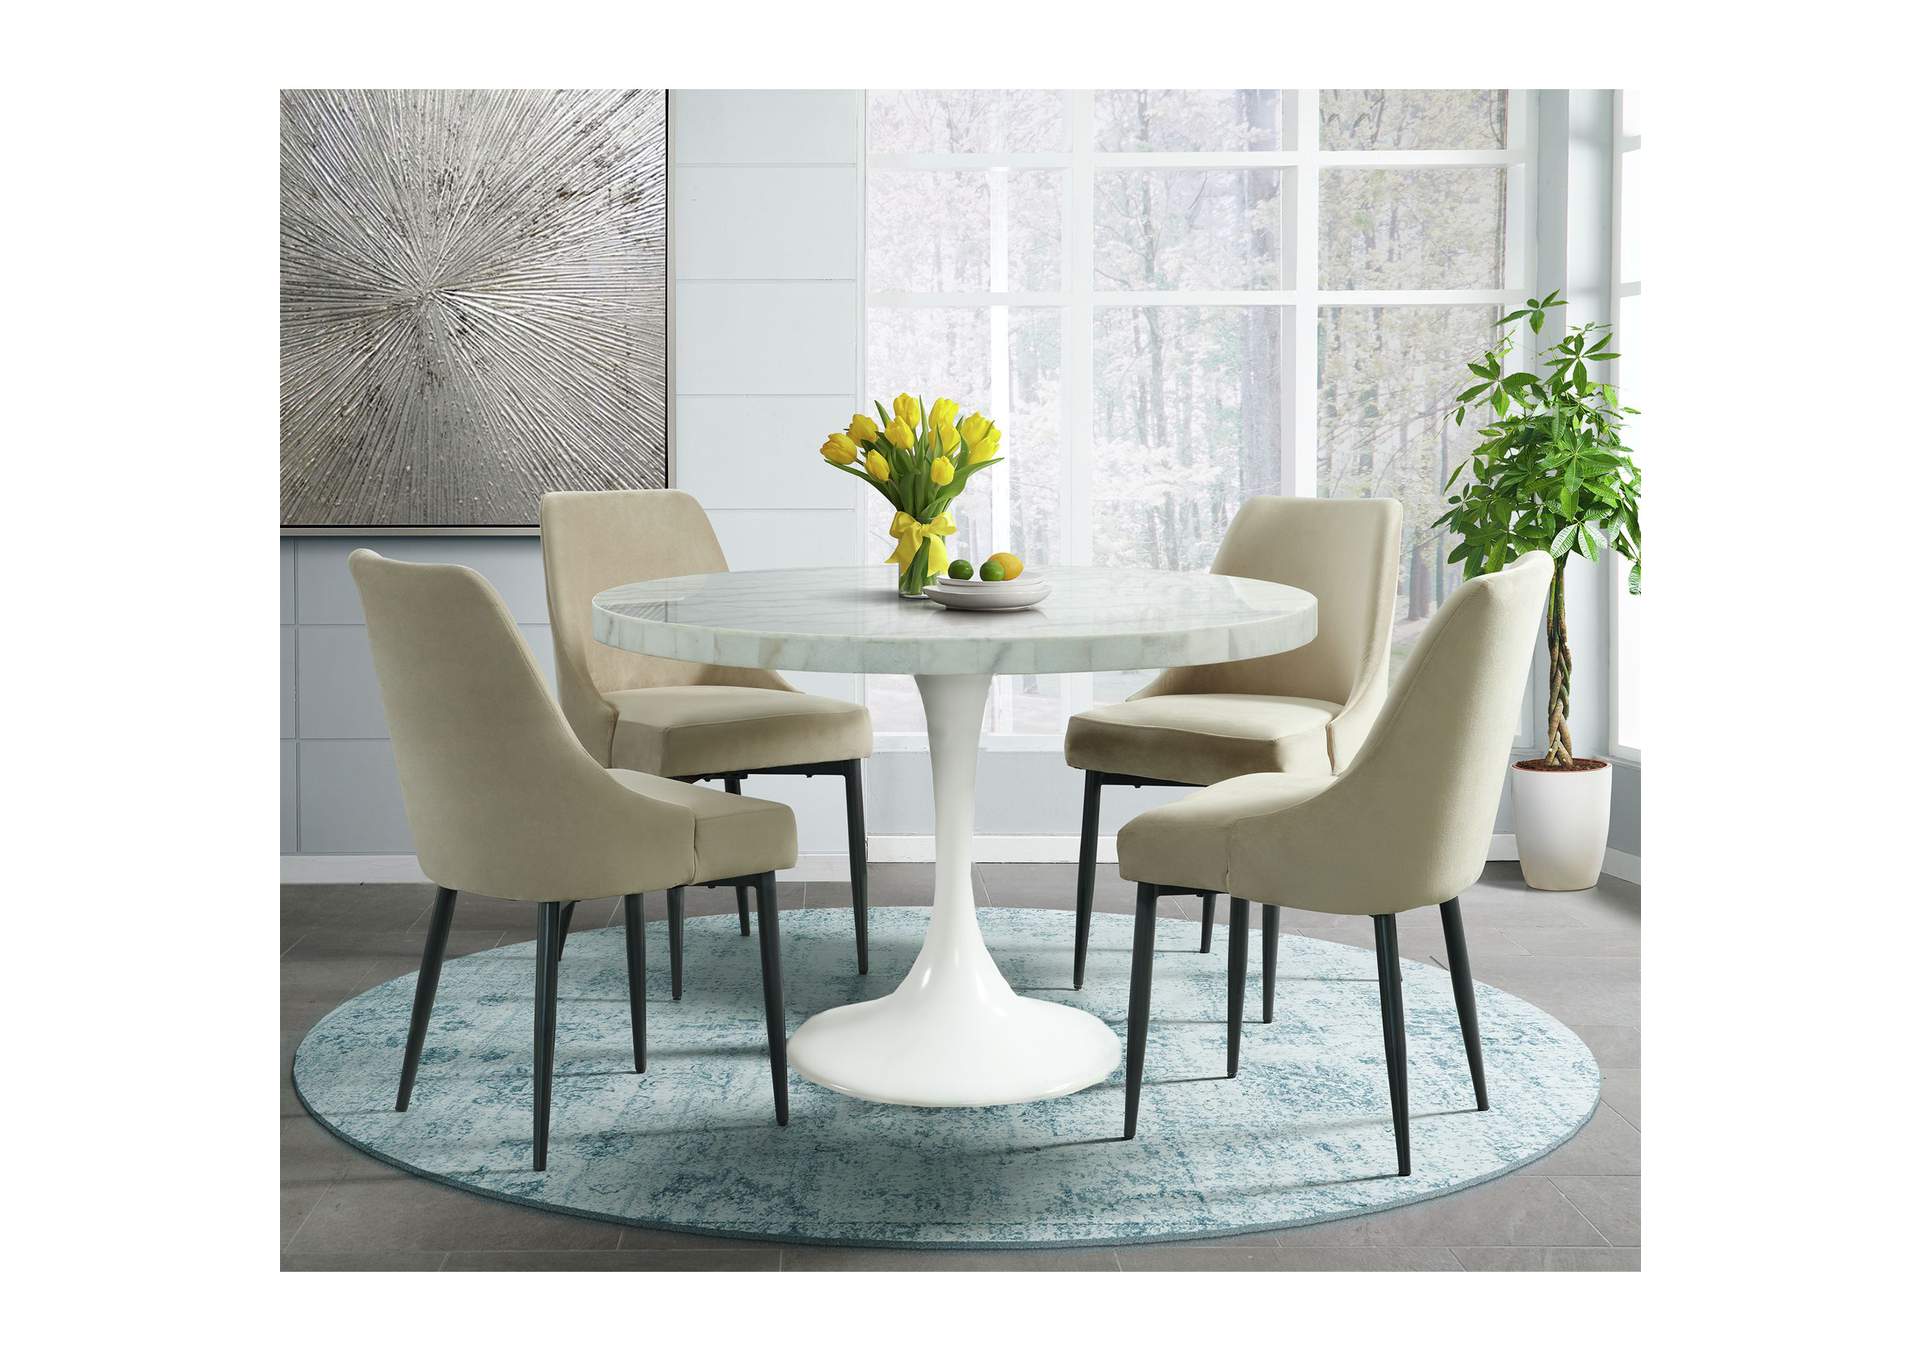 Celeste Round Dining Table In White,Elements